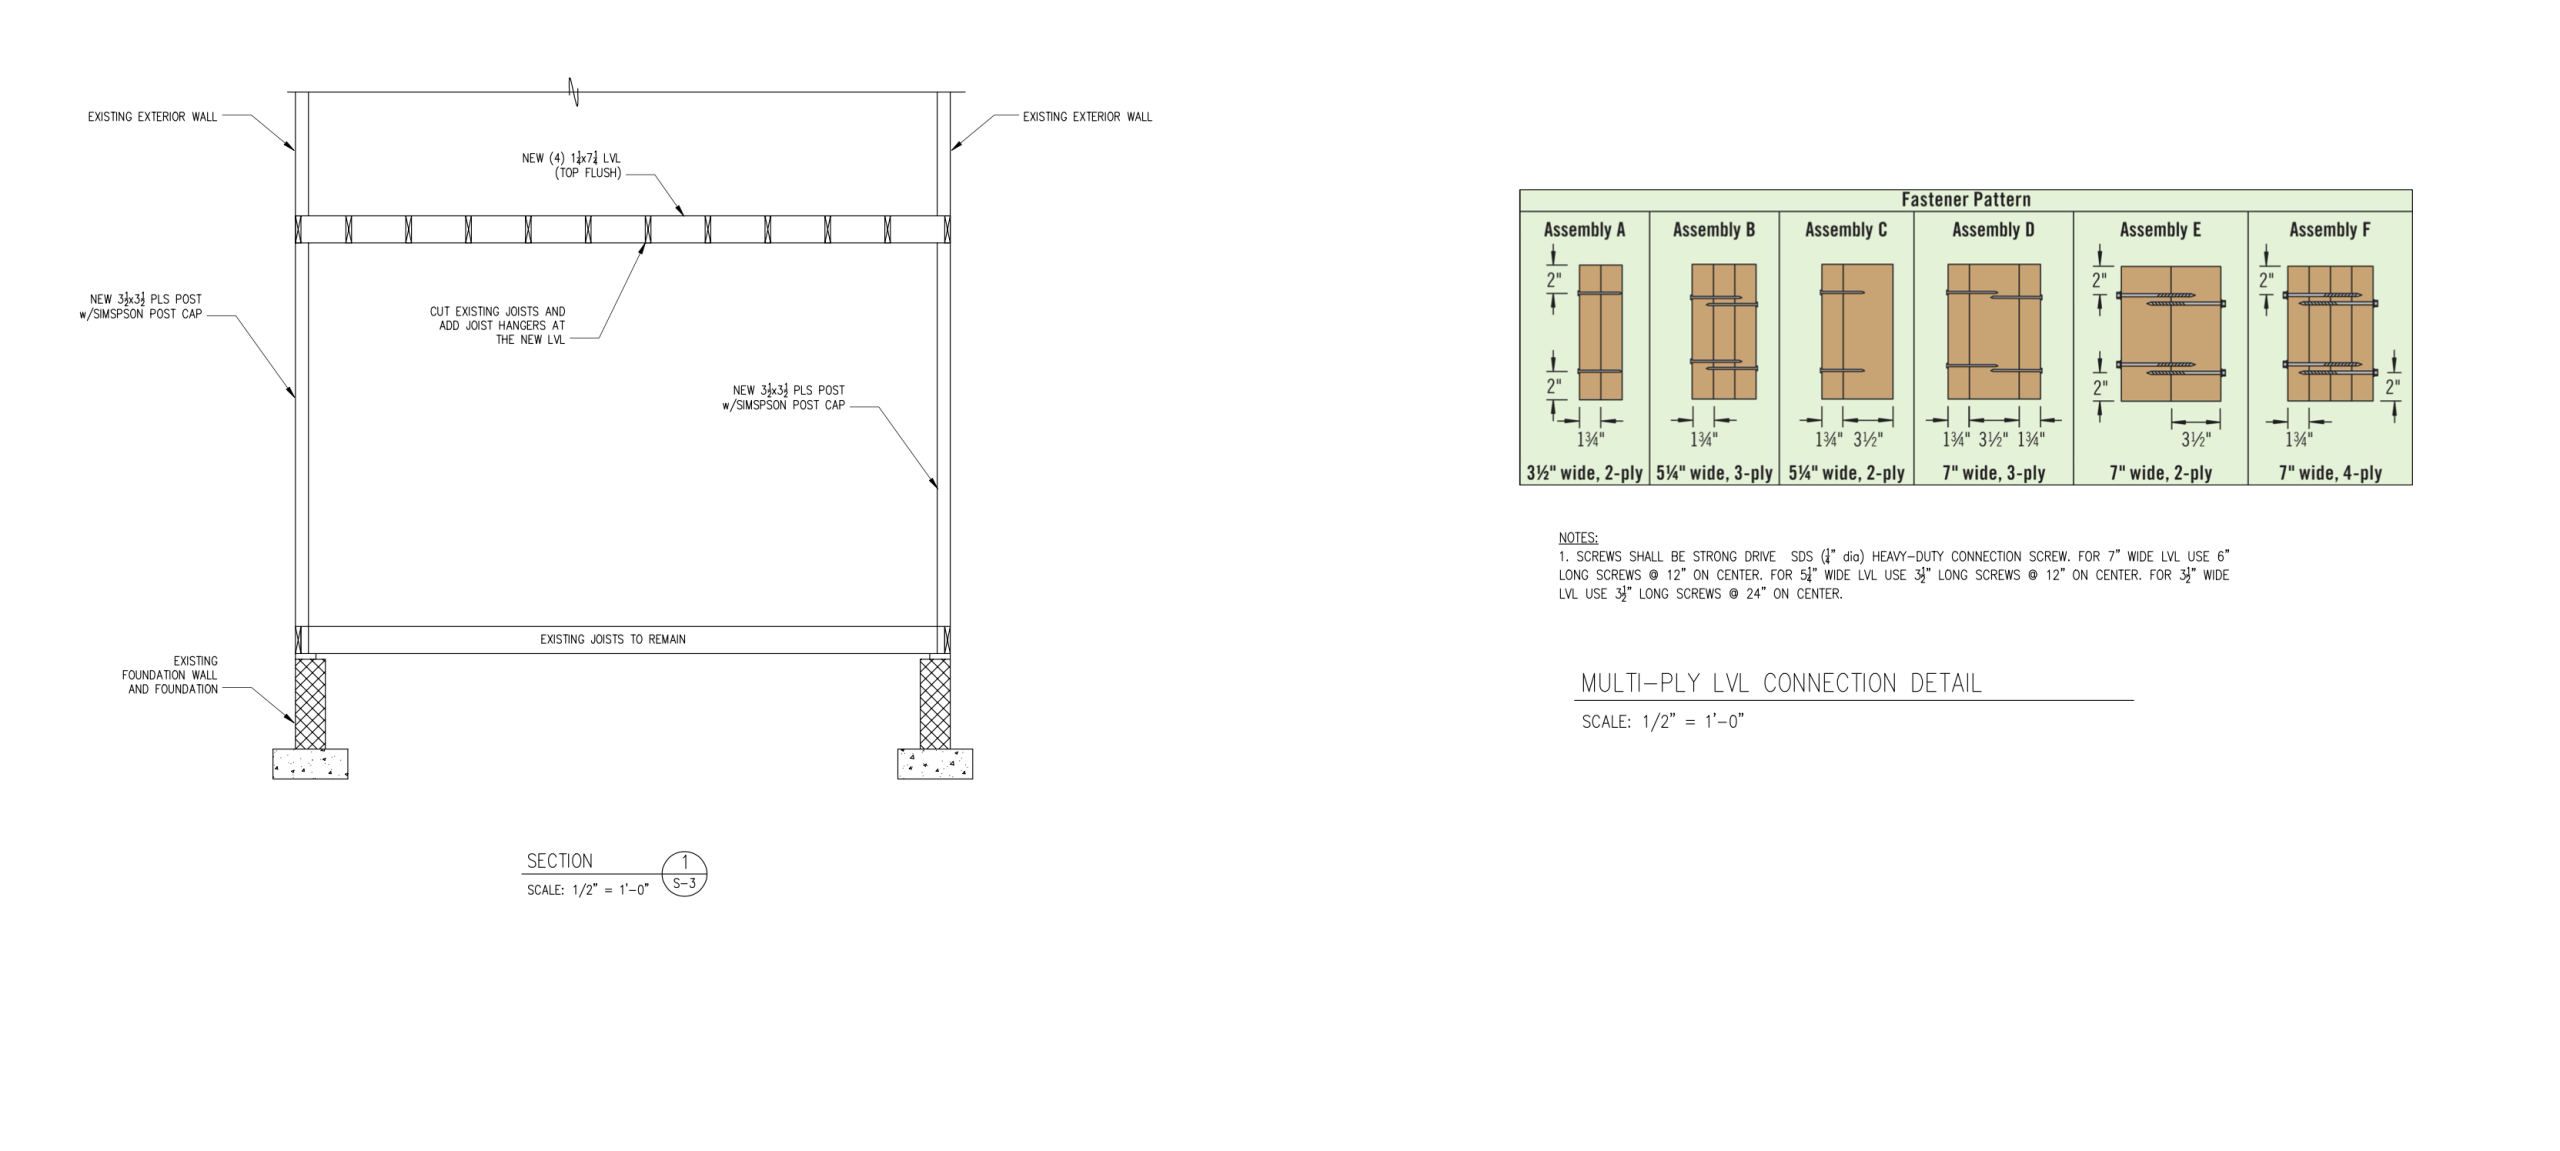 structural drawings dc